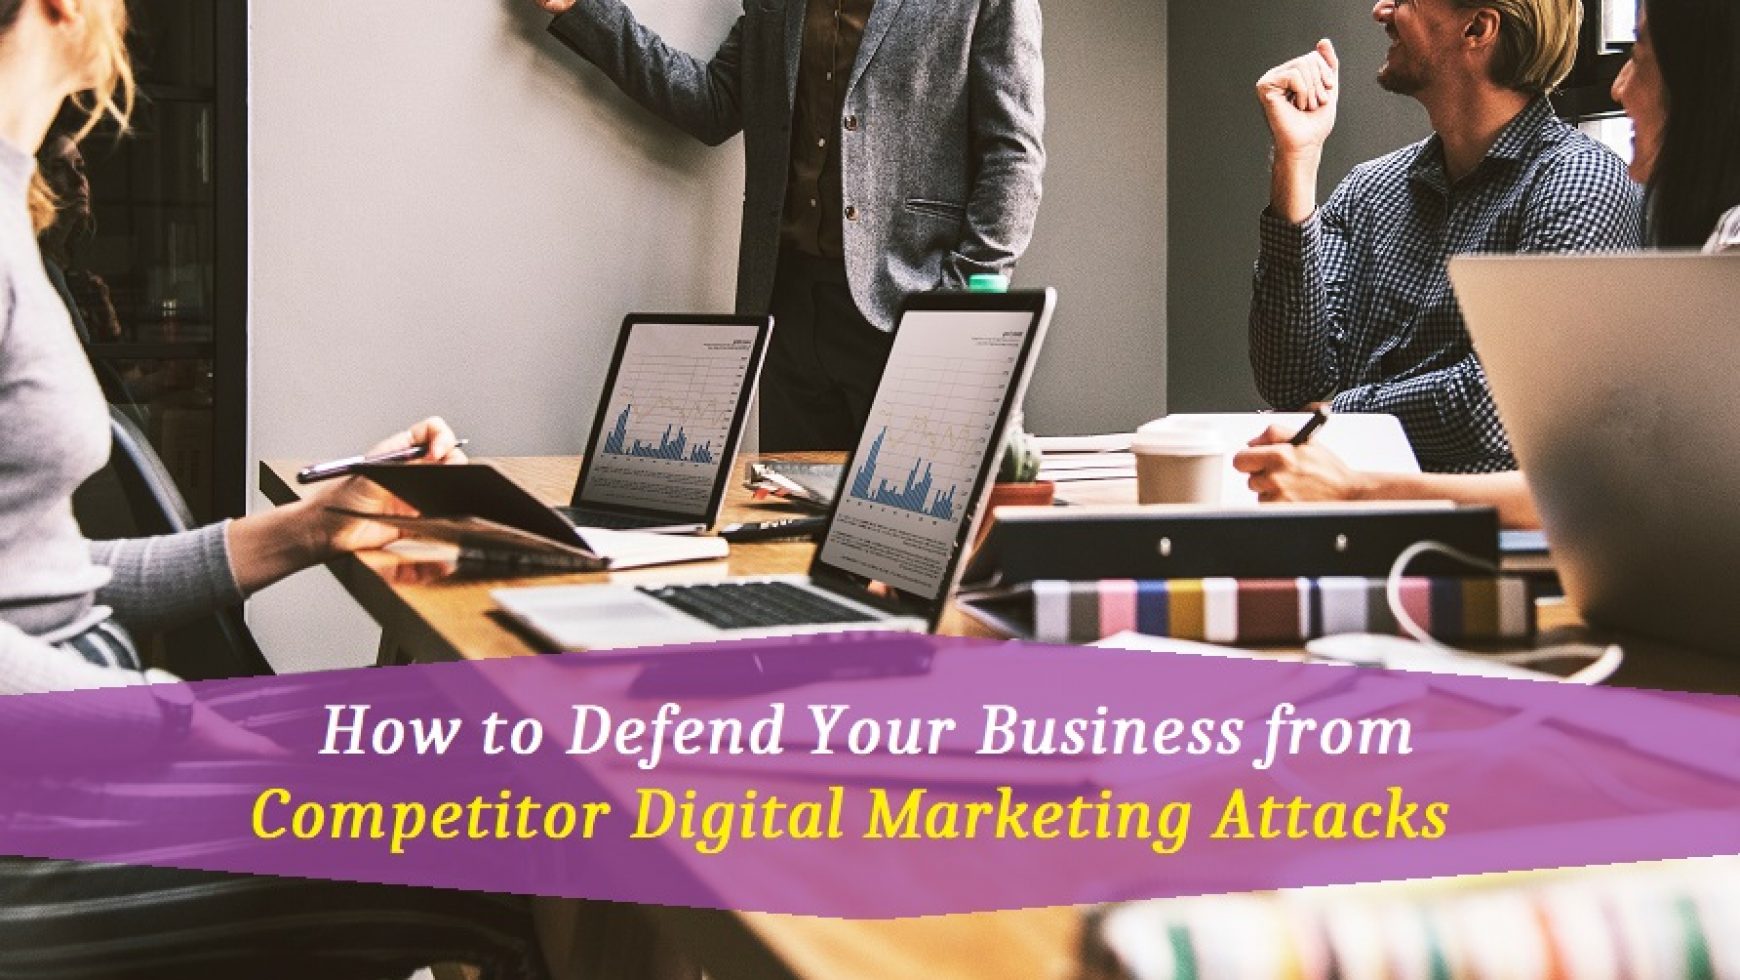 How to Defend Your Business from Competitor Digital Marketing Attacks?